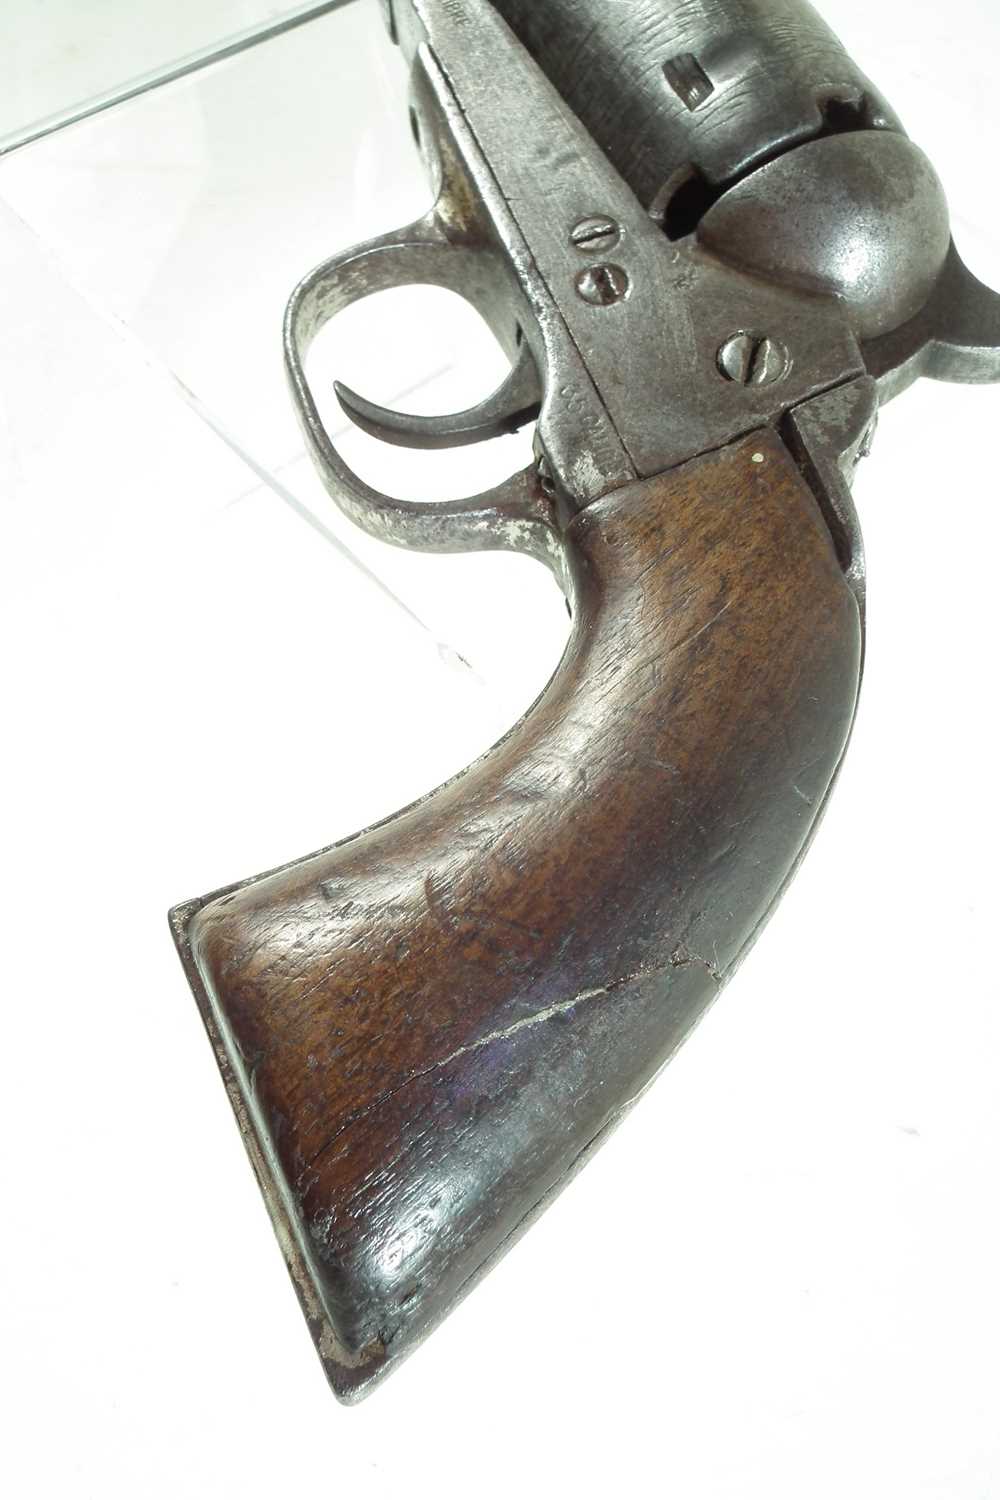 Percussion Colt type revolver probably by Clement arms - Image 9 of 12